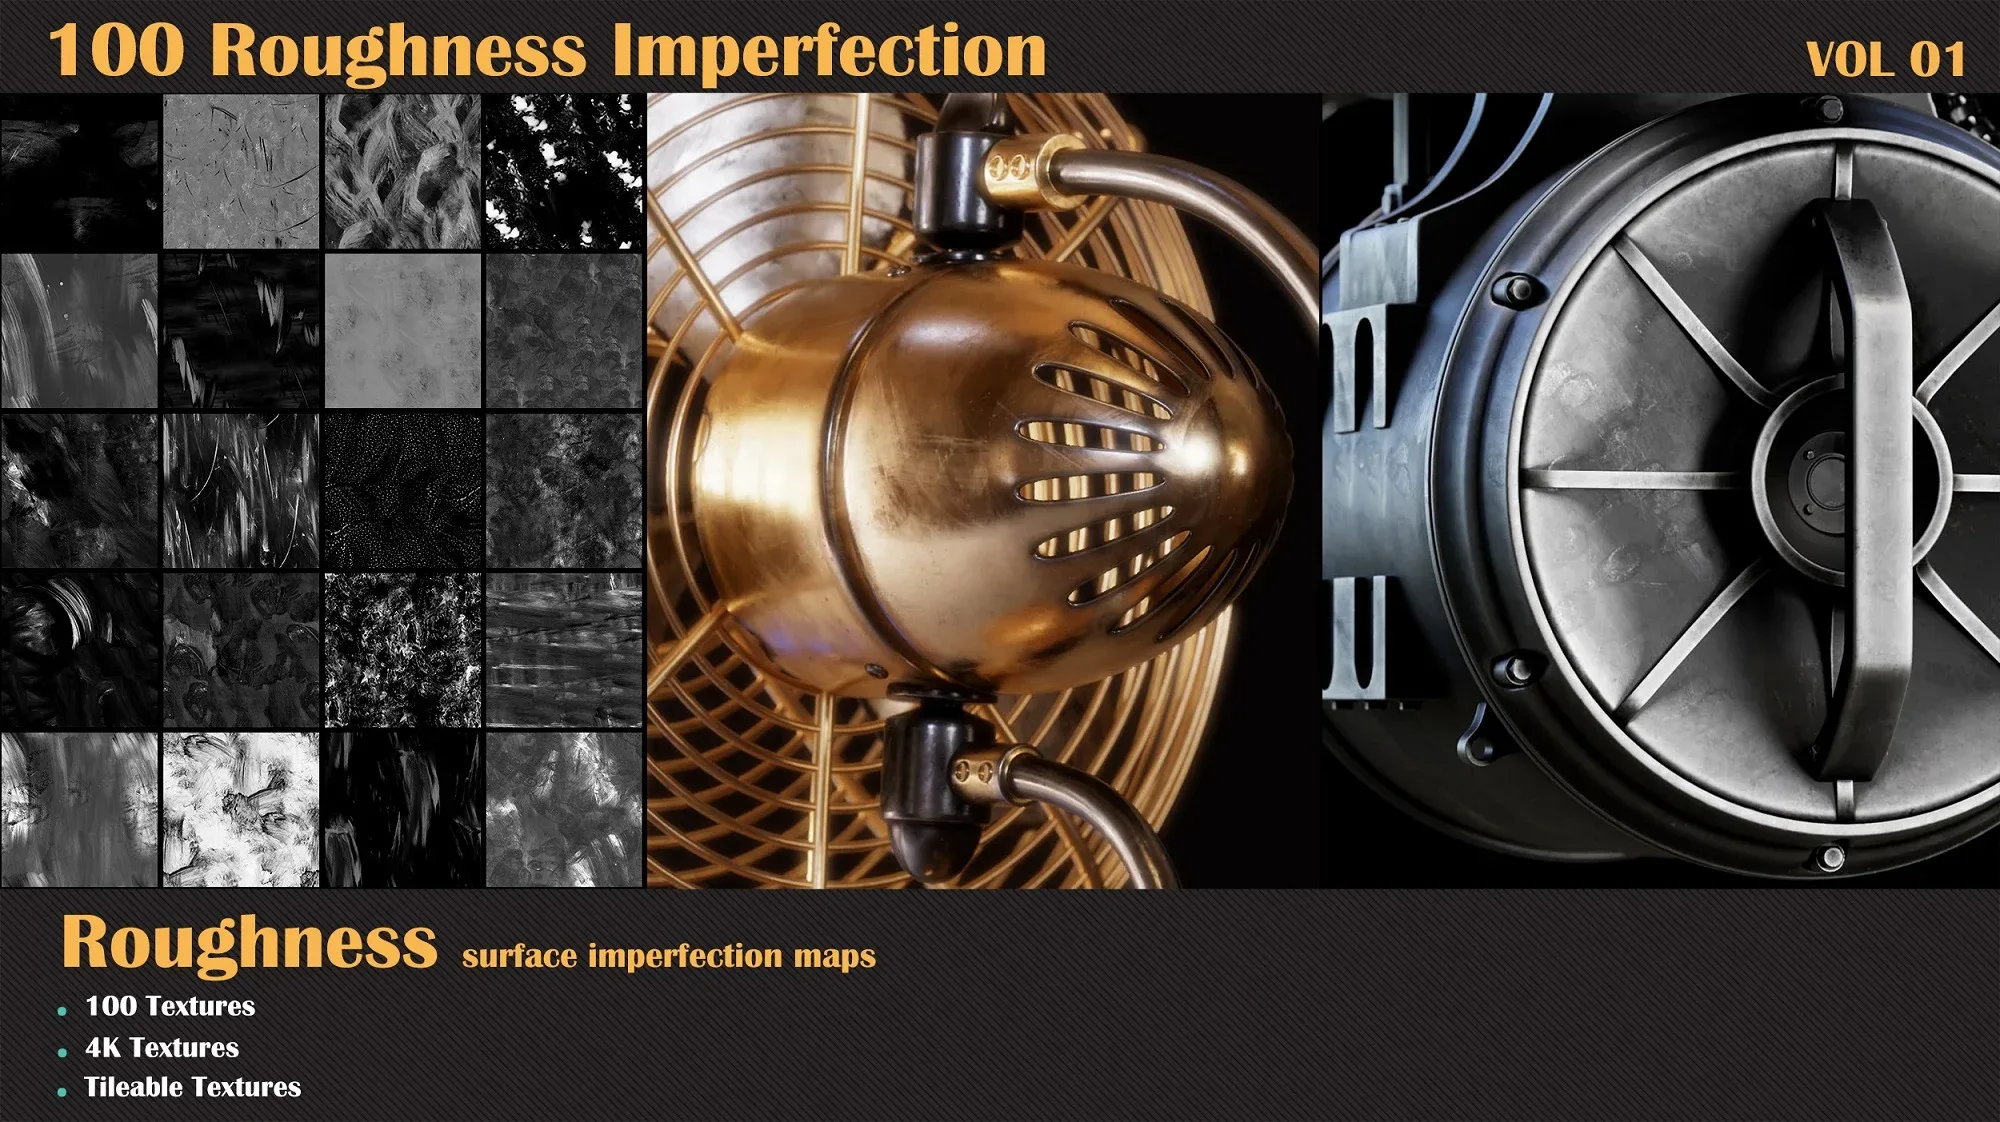 100 Roughness Imperfection - VOL 01